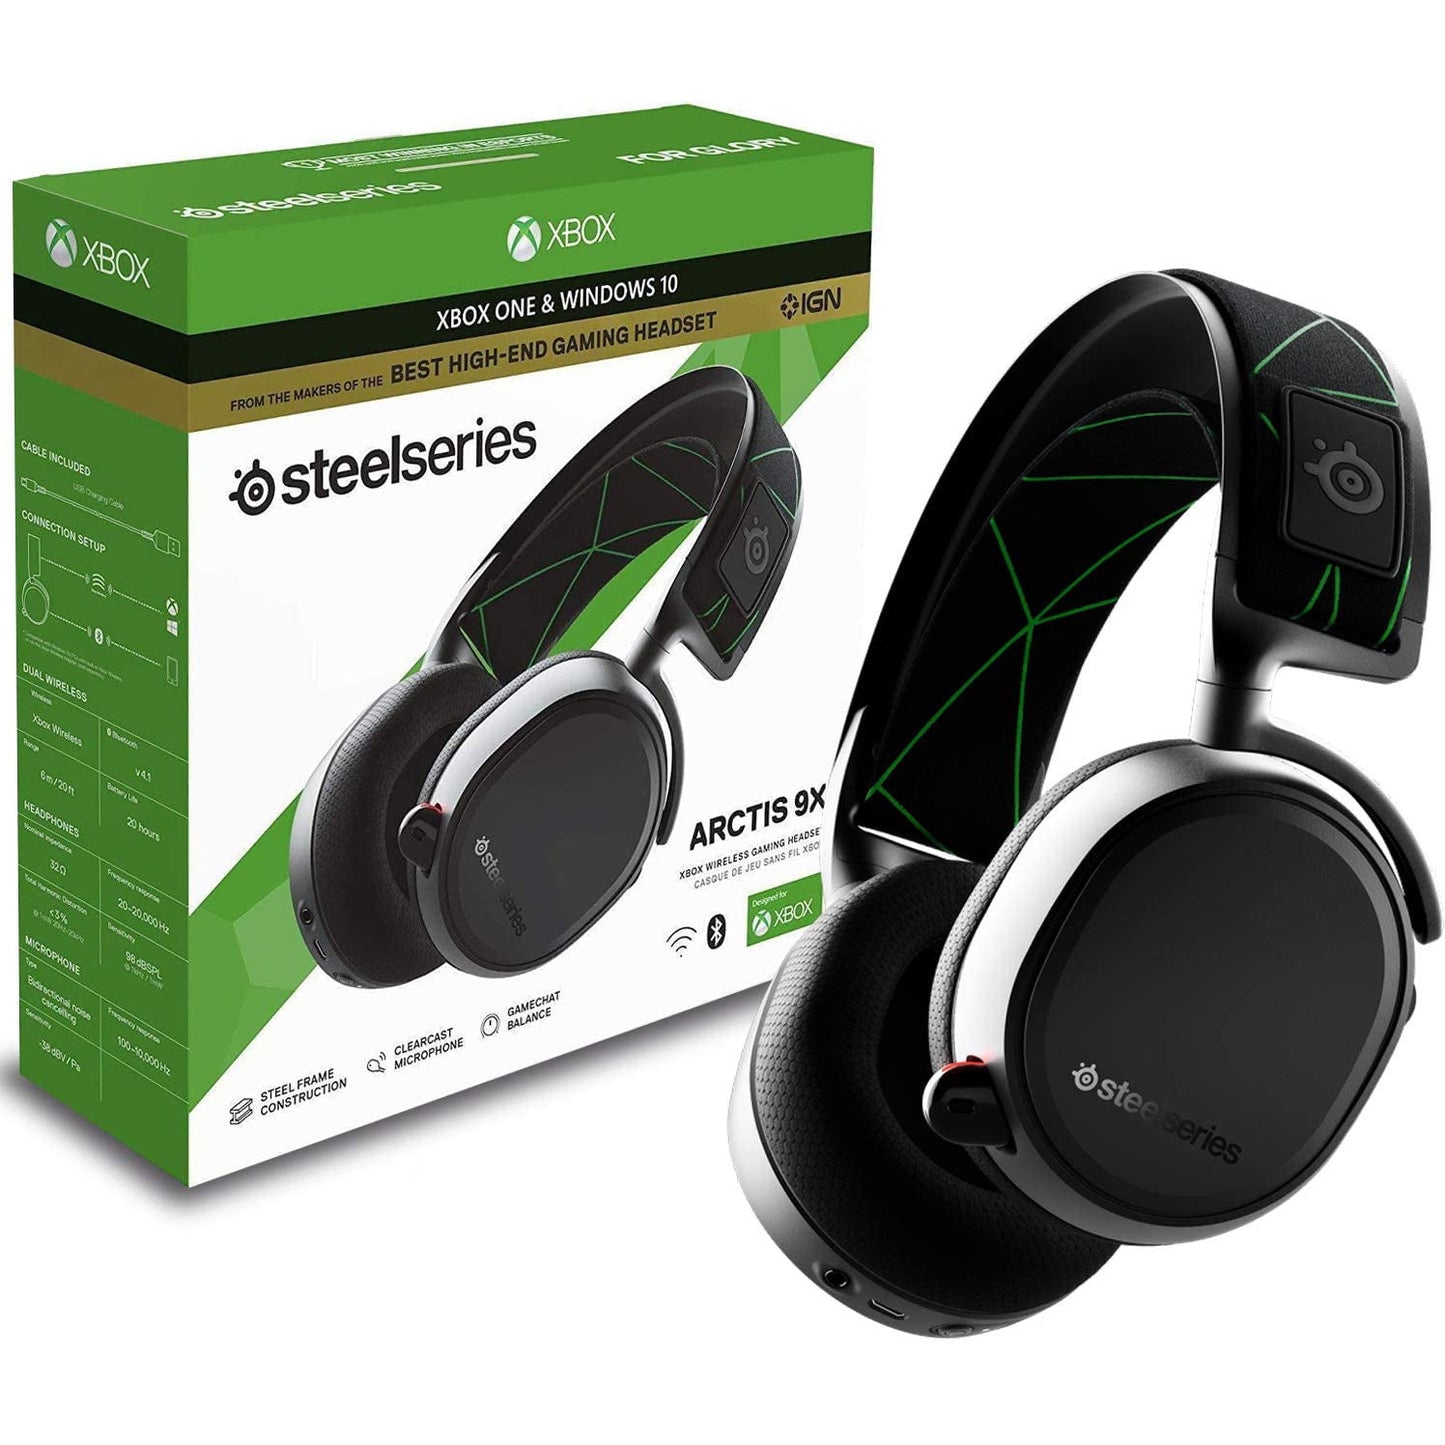 SteelSeries Arctis 9X Series X Wireless Gaming Headset For Xbox